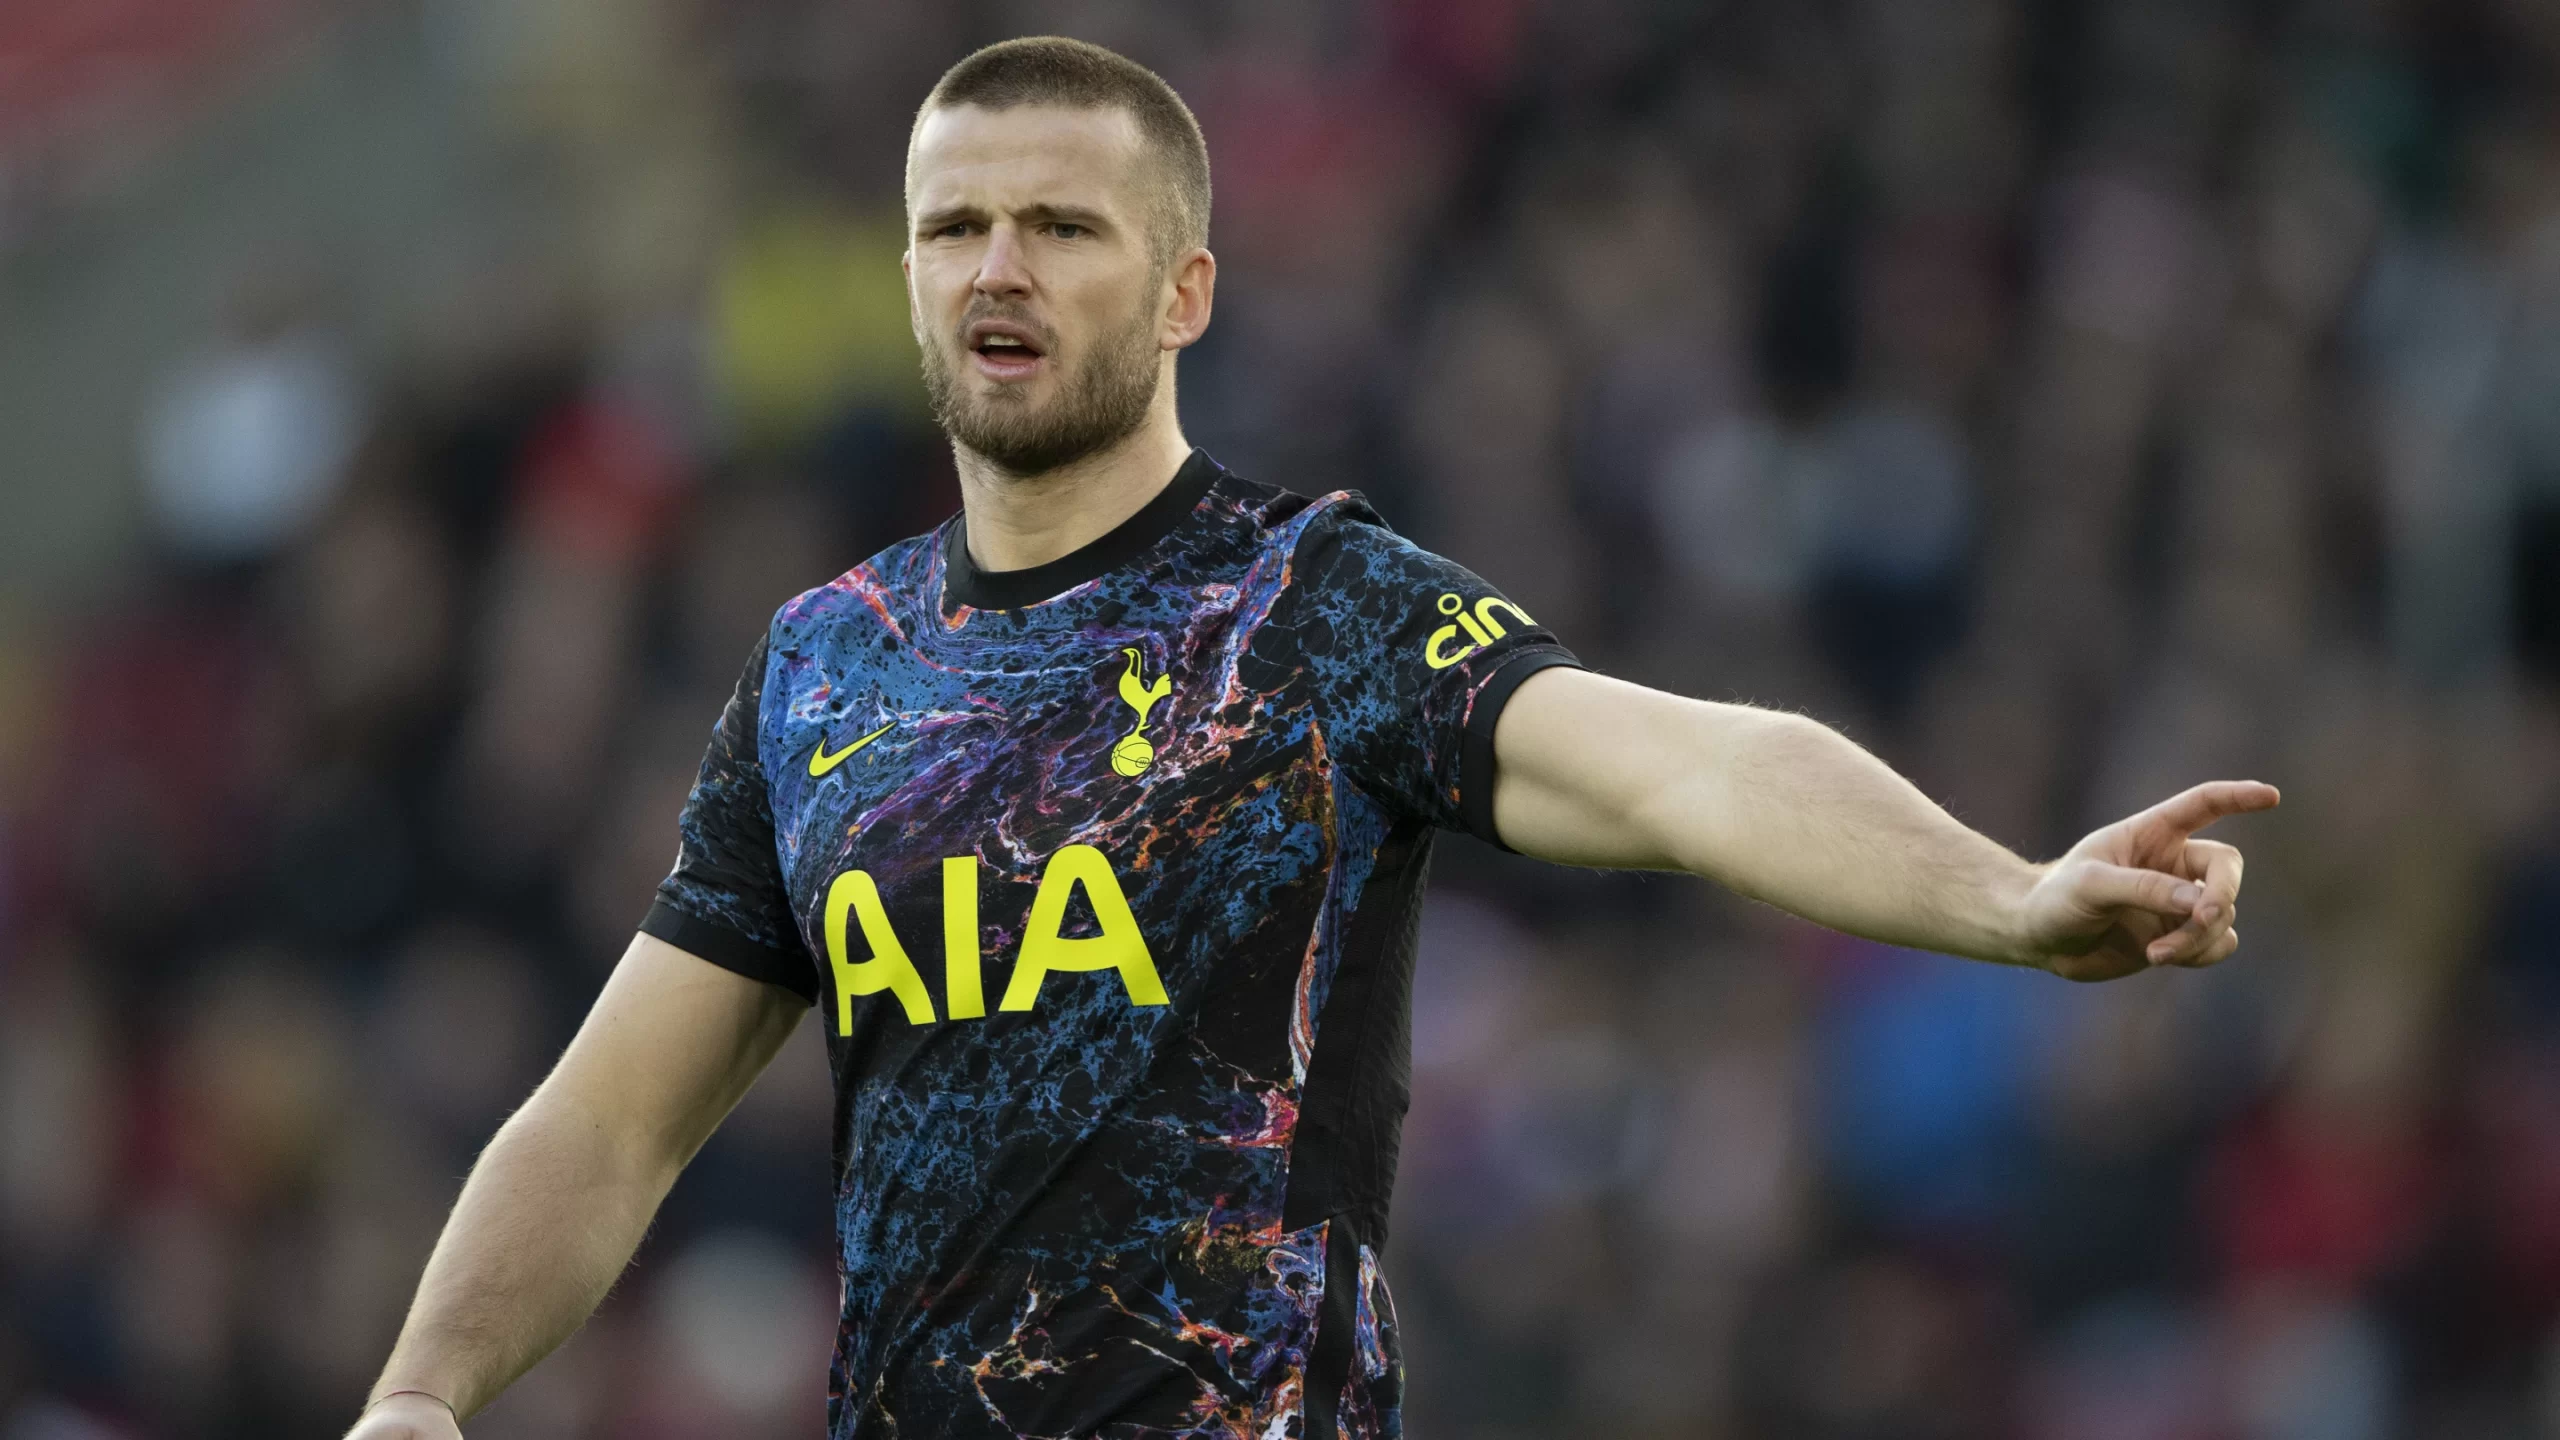 Frank McAvennie believes Eric Dier will get destroyed if he continues playing in defence for Tottenham Hotspur.